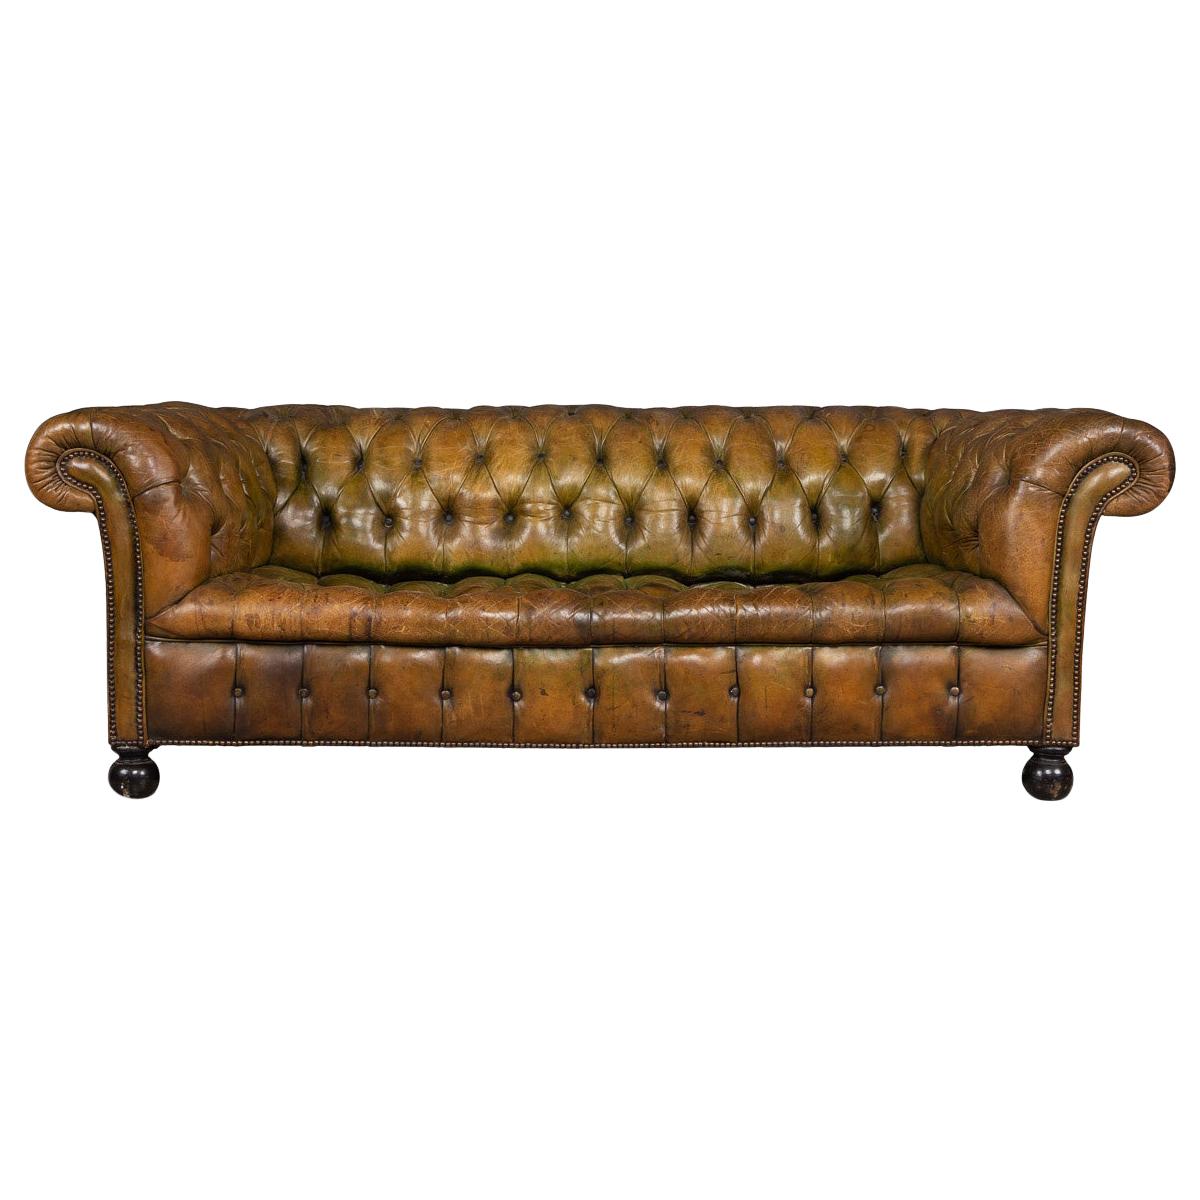 20th Century Chesterfield Leather Sofa with Button Down Seat, circa 1920